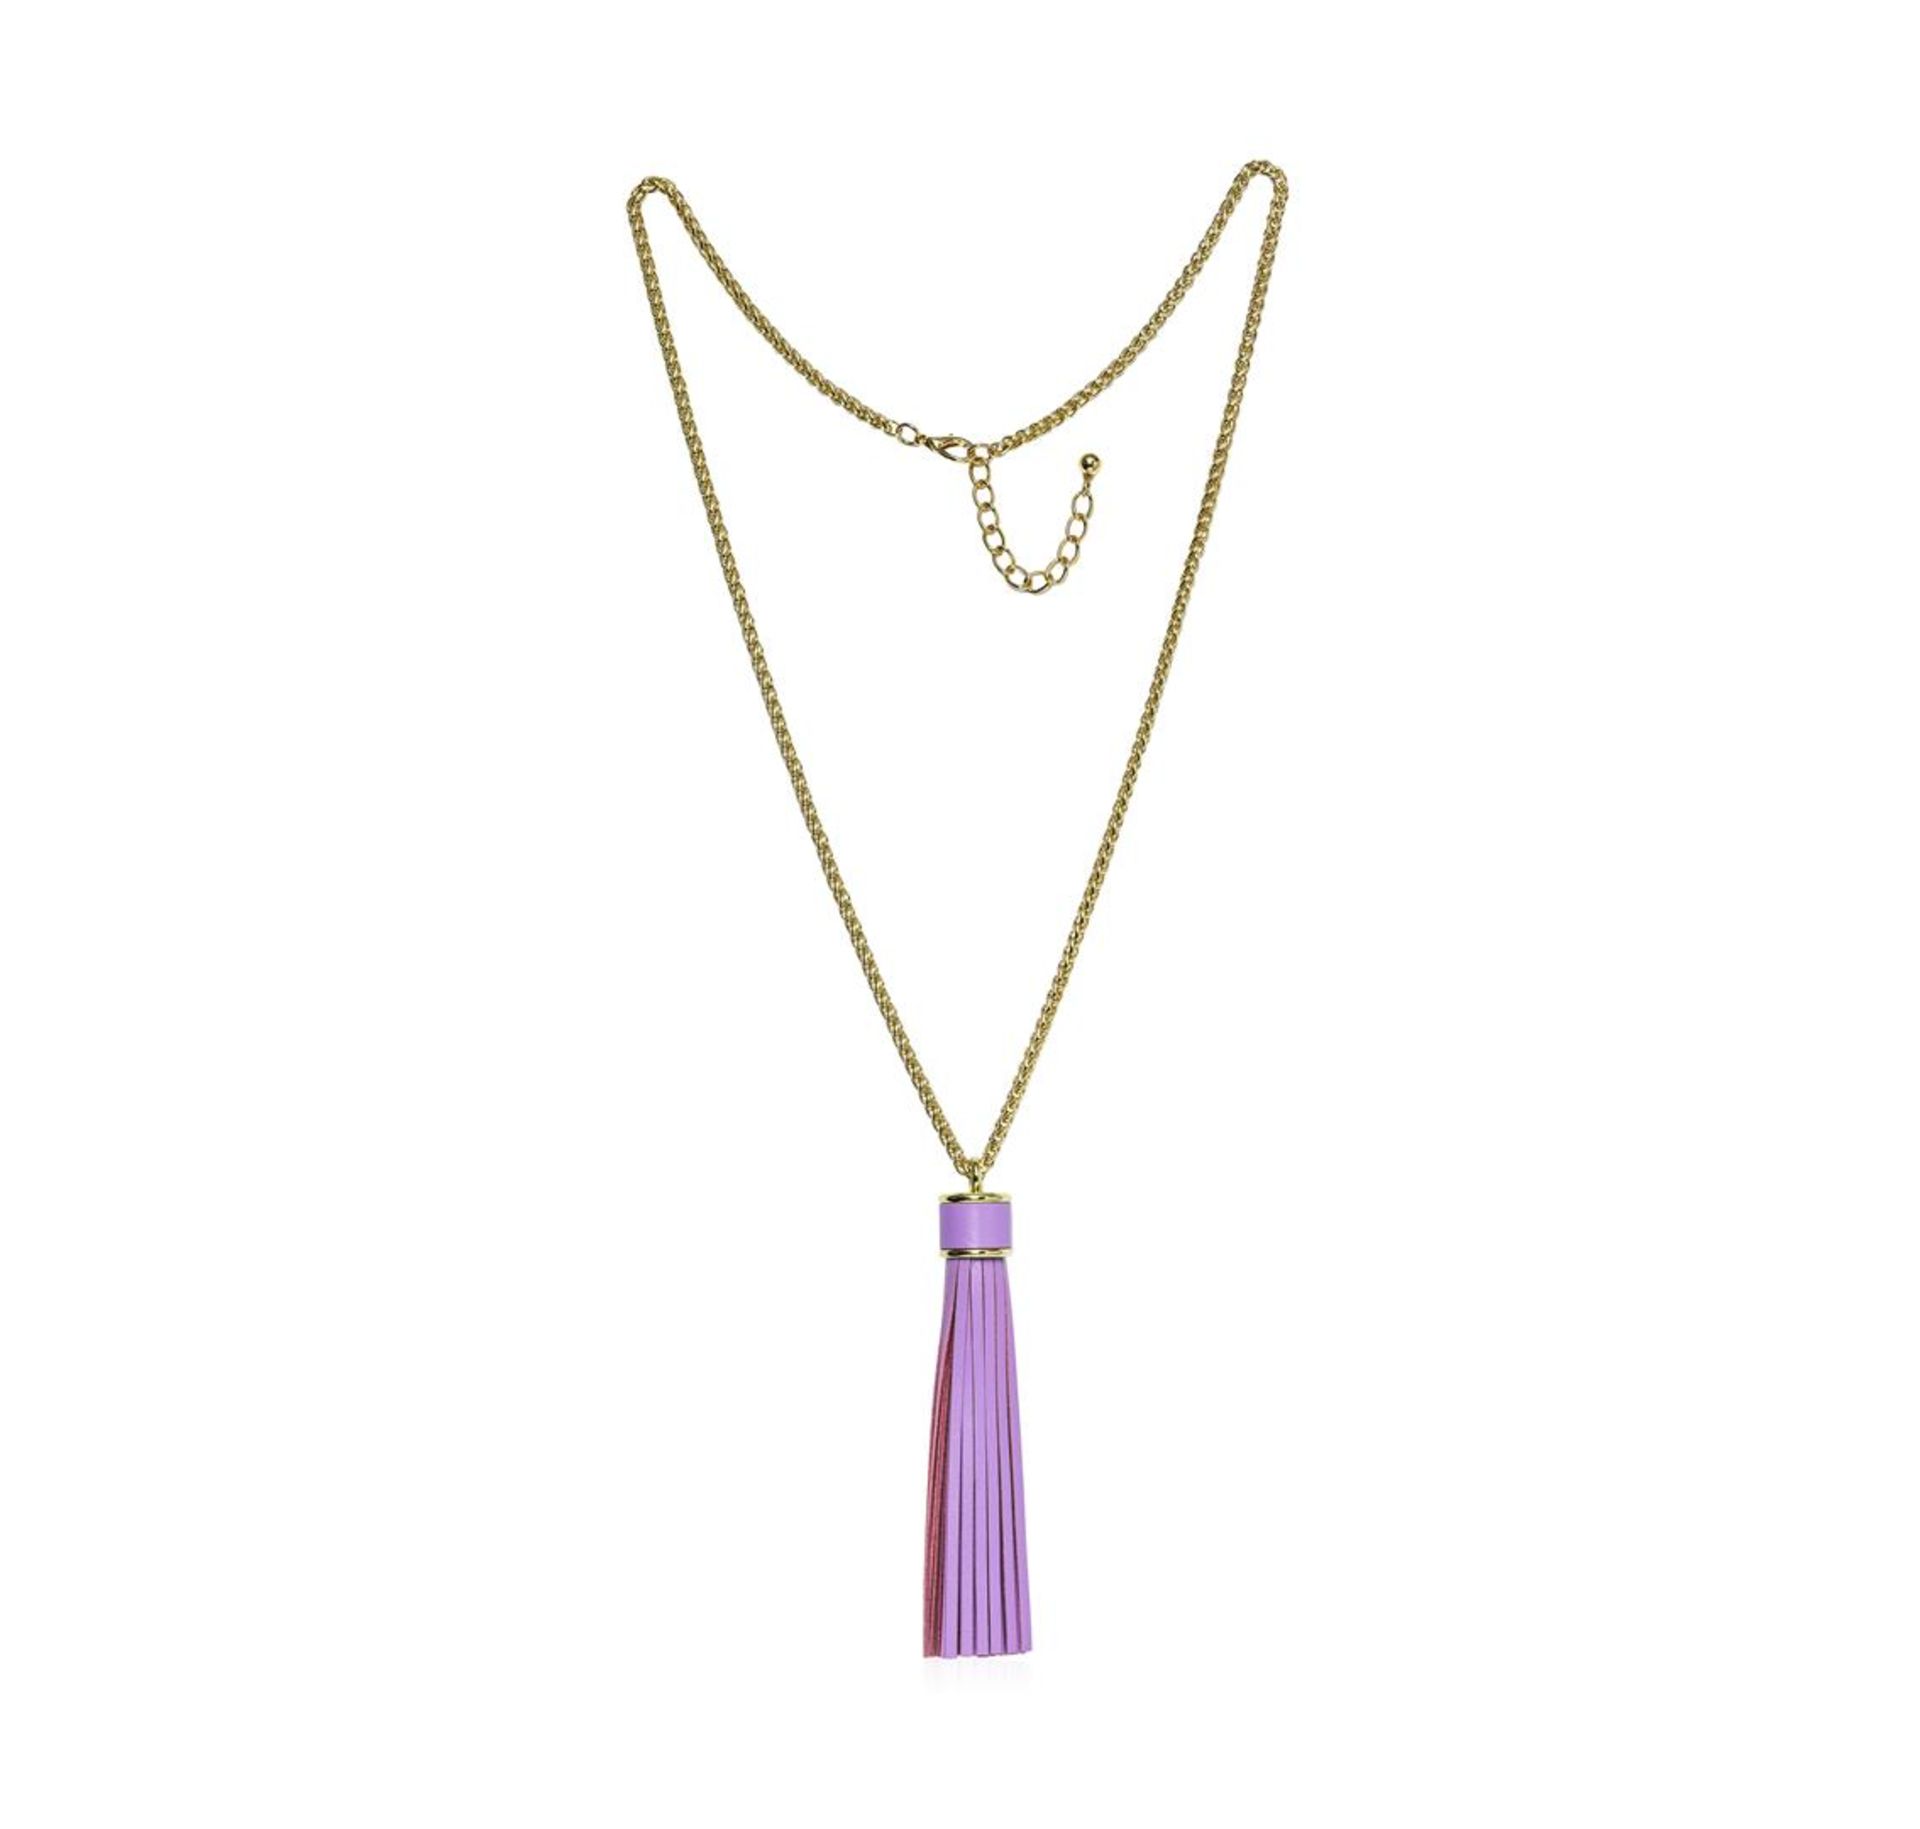 Leather Tassel Chain Necklace - Gold Plated